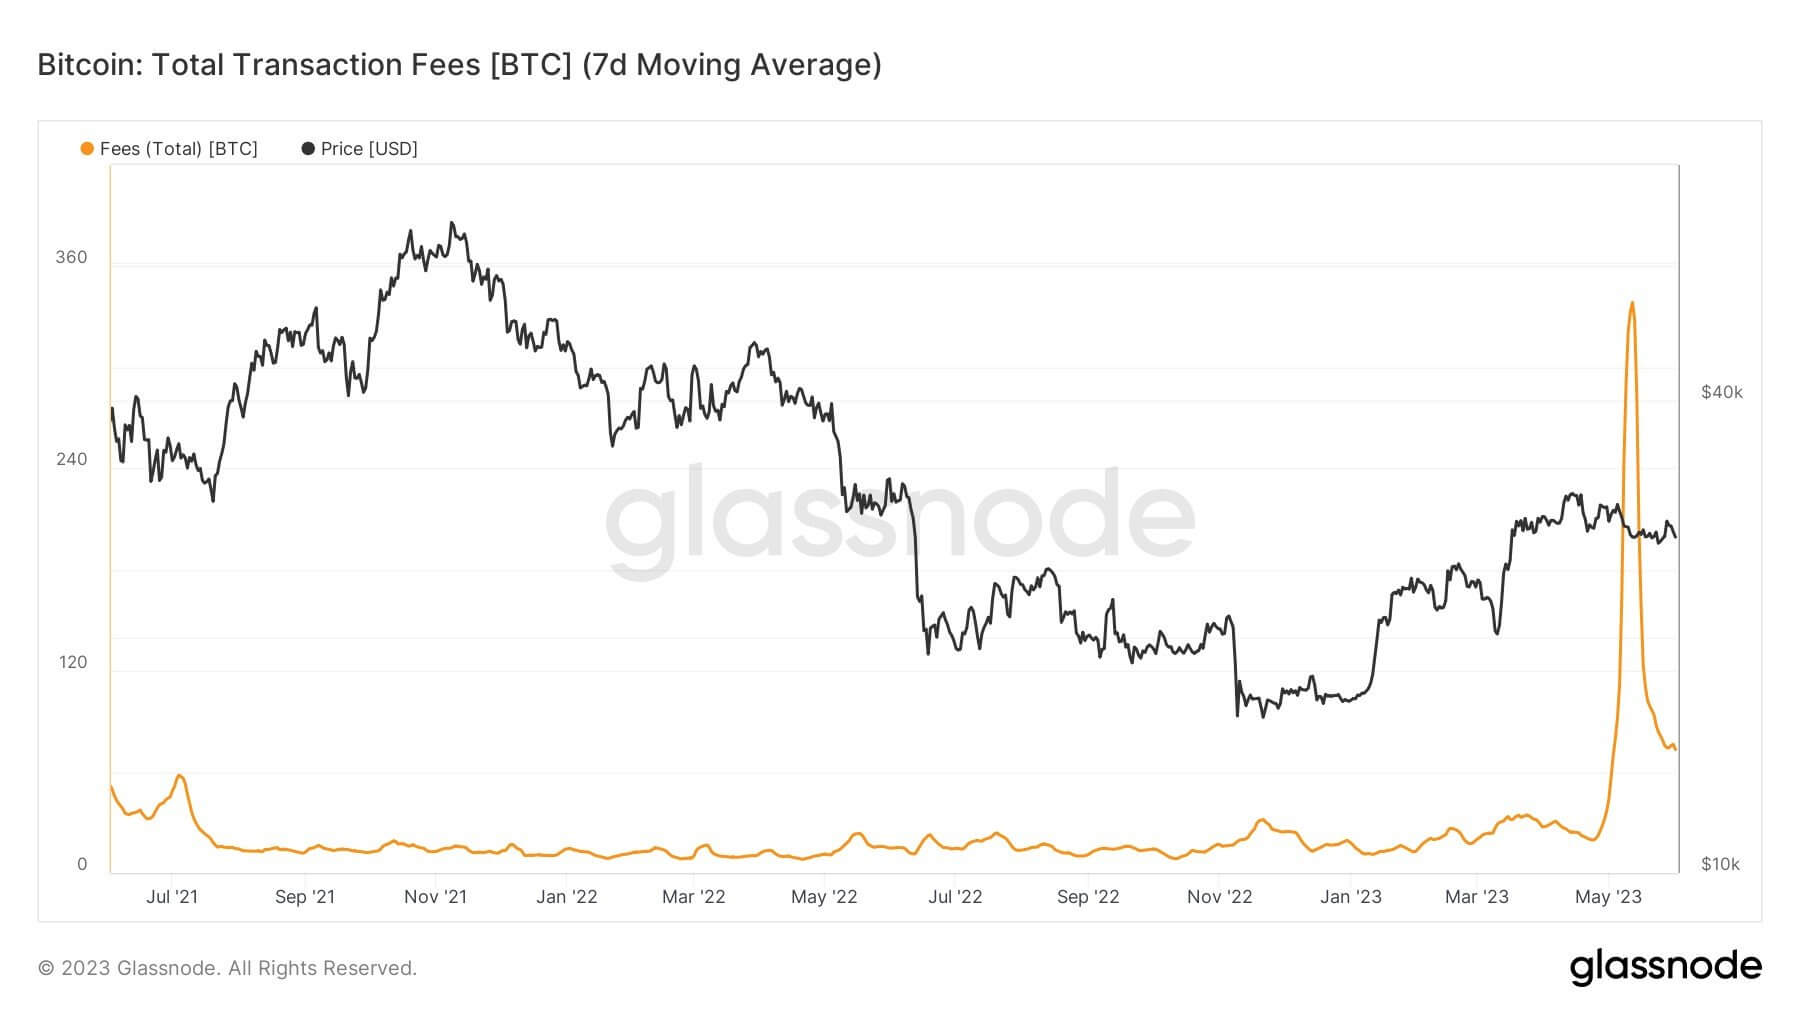 Bitcoin miner fees stay elevated, boosting daily revenue to $1.8M